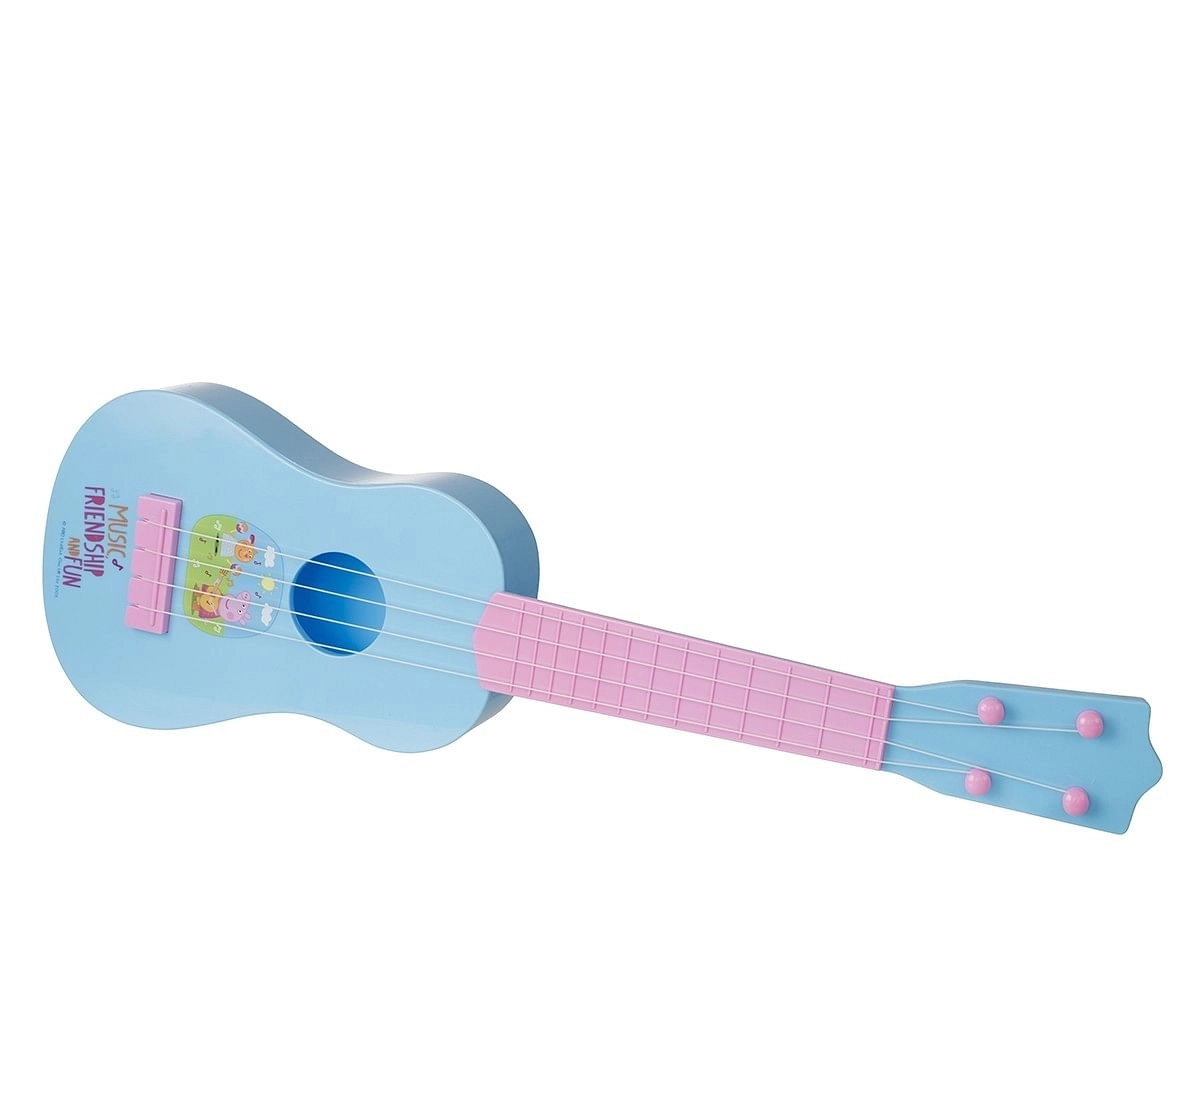 Peppa Pig - Acoustic Guitar Guitars & String Instruments for Kids age 3Y+ 